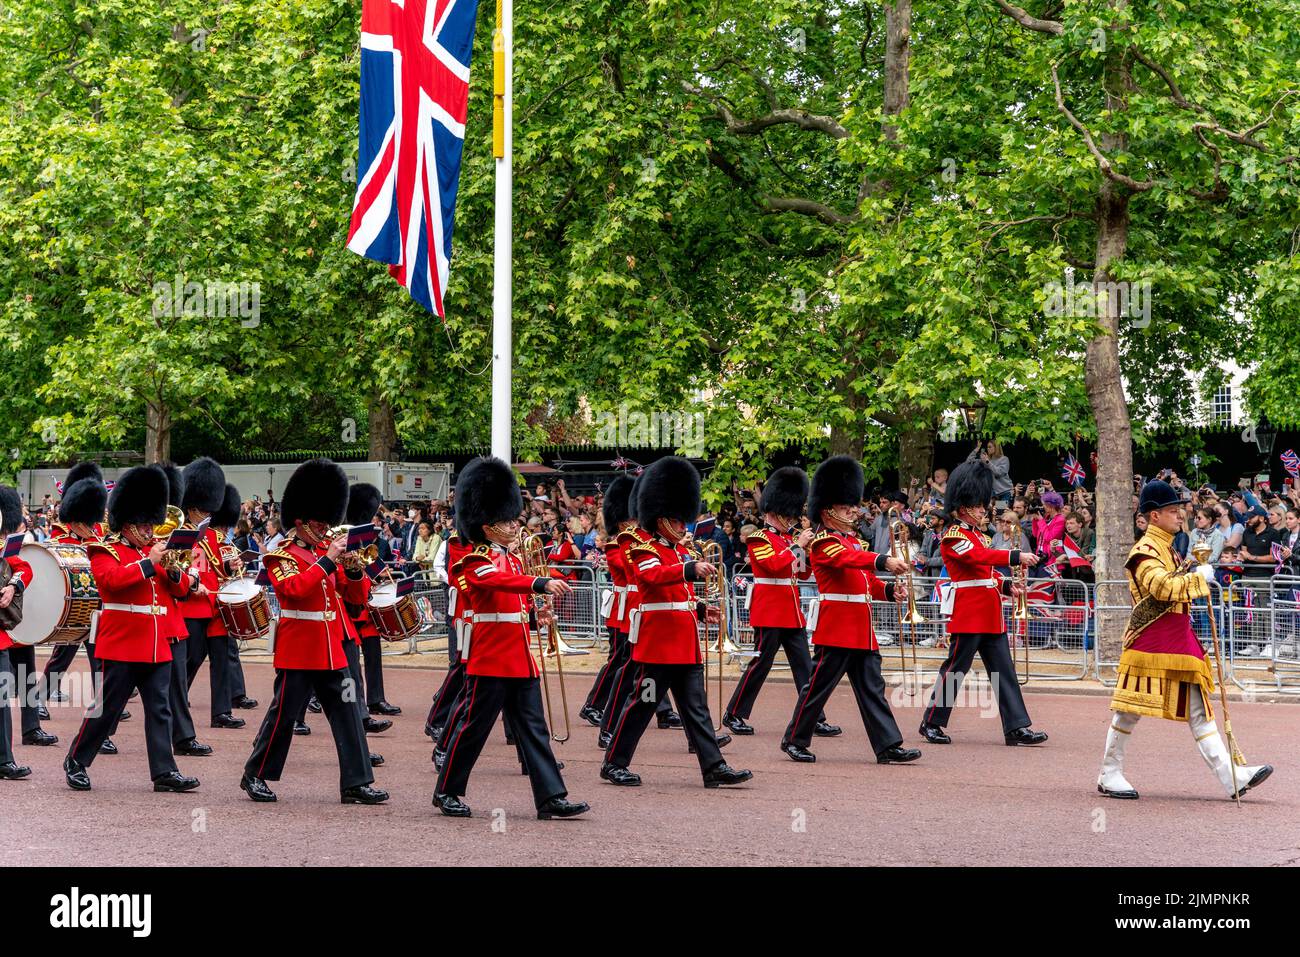 Army Musicians Take Part In The Queen's Birthday Parade By Marching Along The Mall To Horse Guards Parade For The Trooping The Colour Ceremony As Part Stock Photo